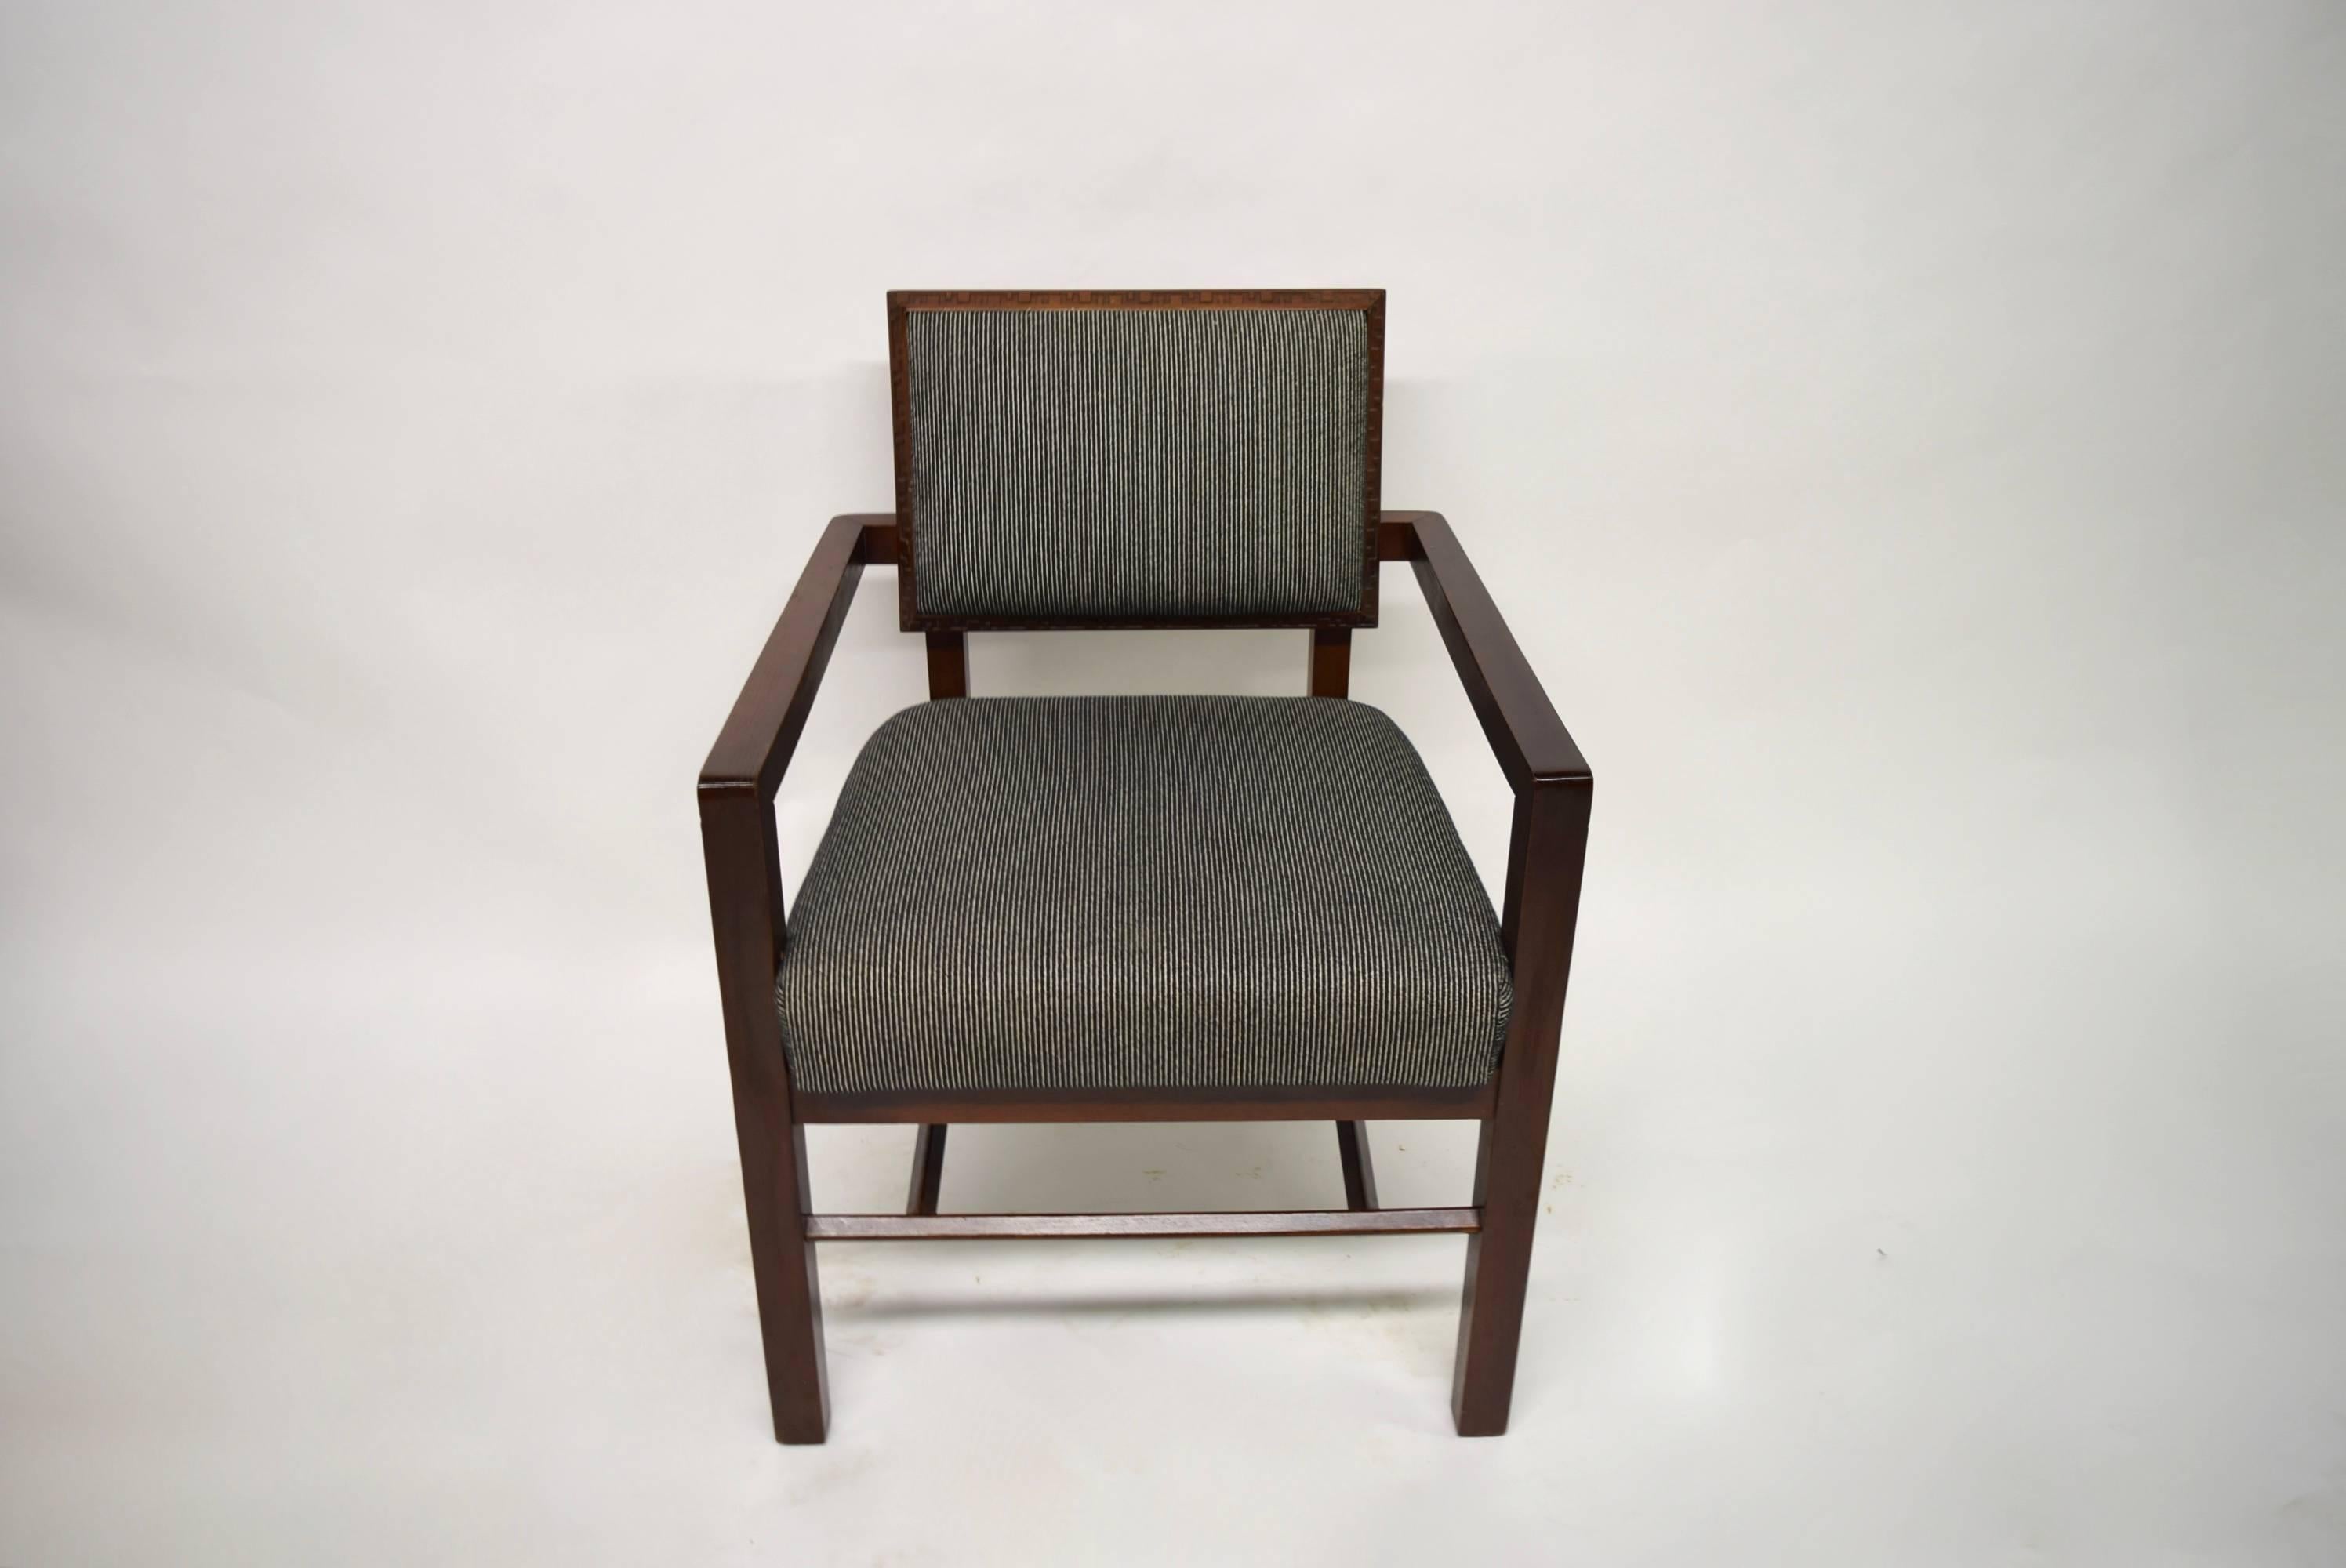 Six side chairs and two armchairs from Frank Lloyd Wright's Taliesin collection for Heritage-Henredon in a mahogany frame and upholstered black and cream vertically striped woven fabric, 1973. 
Armchair measurements: 31.75